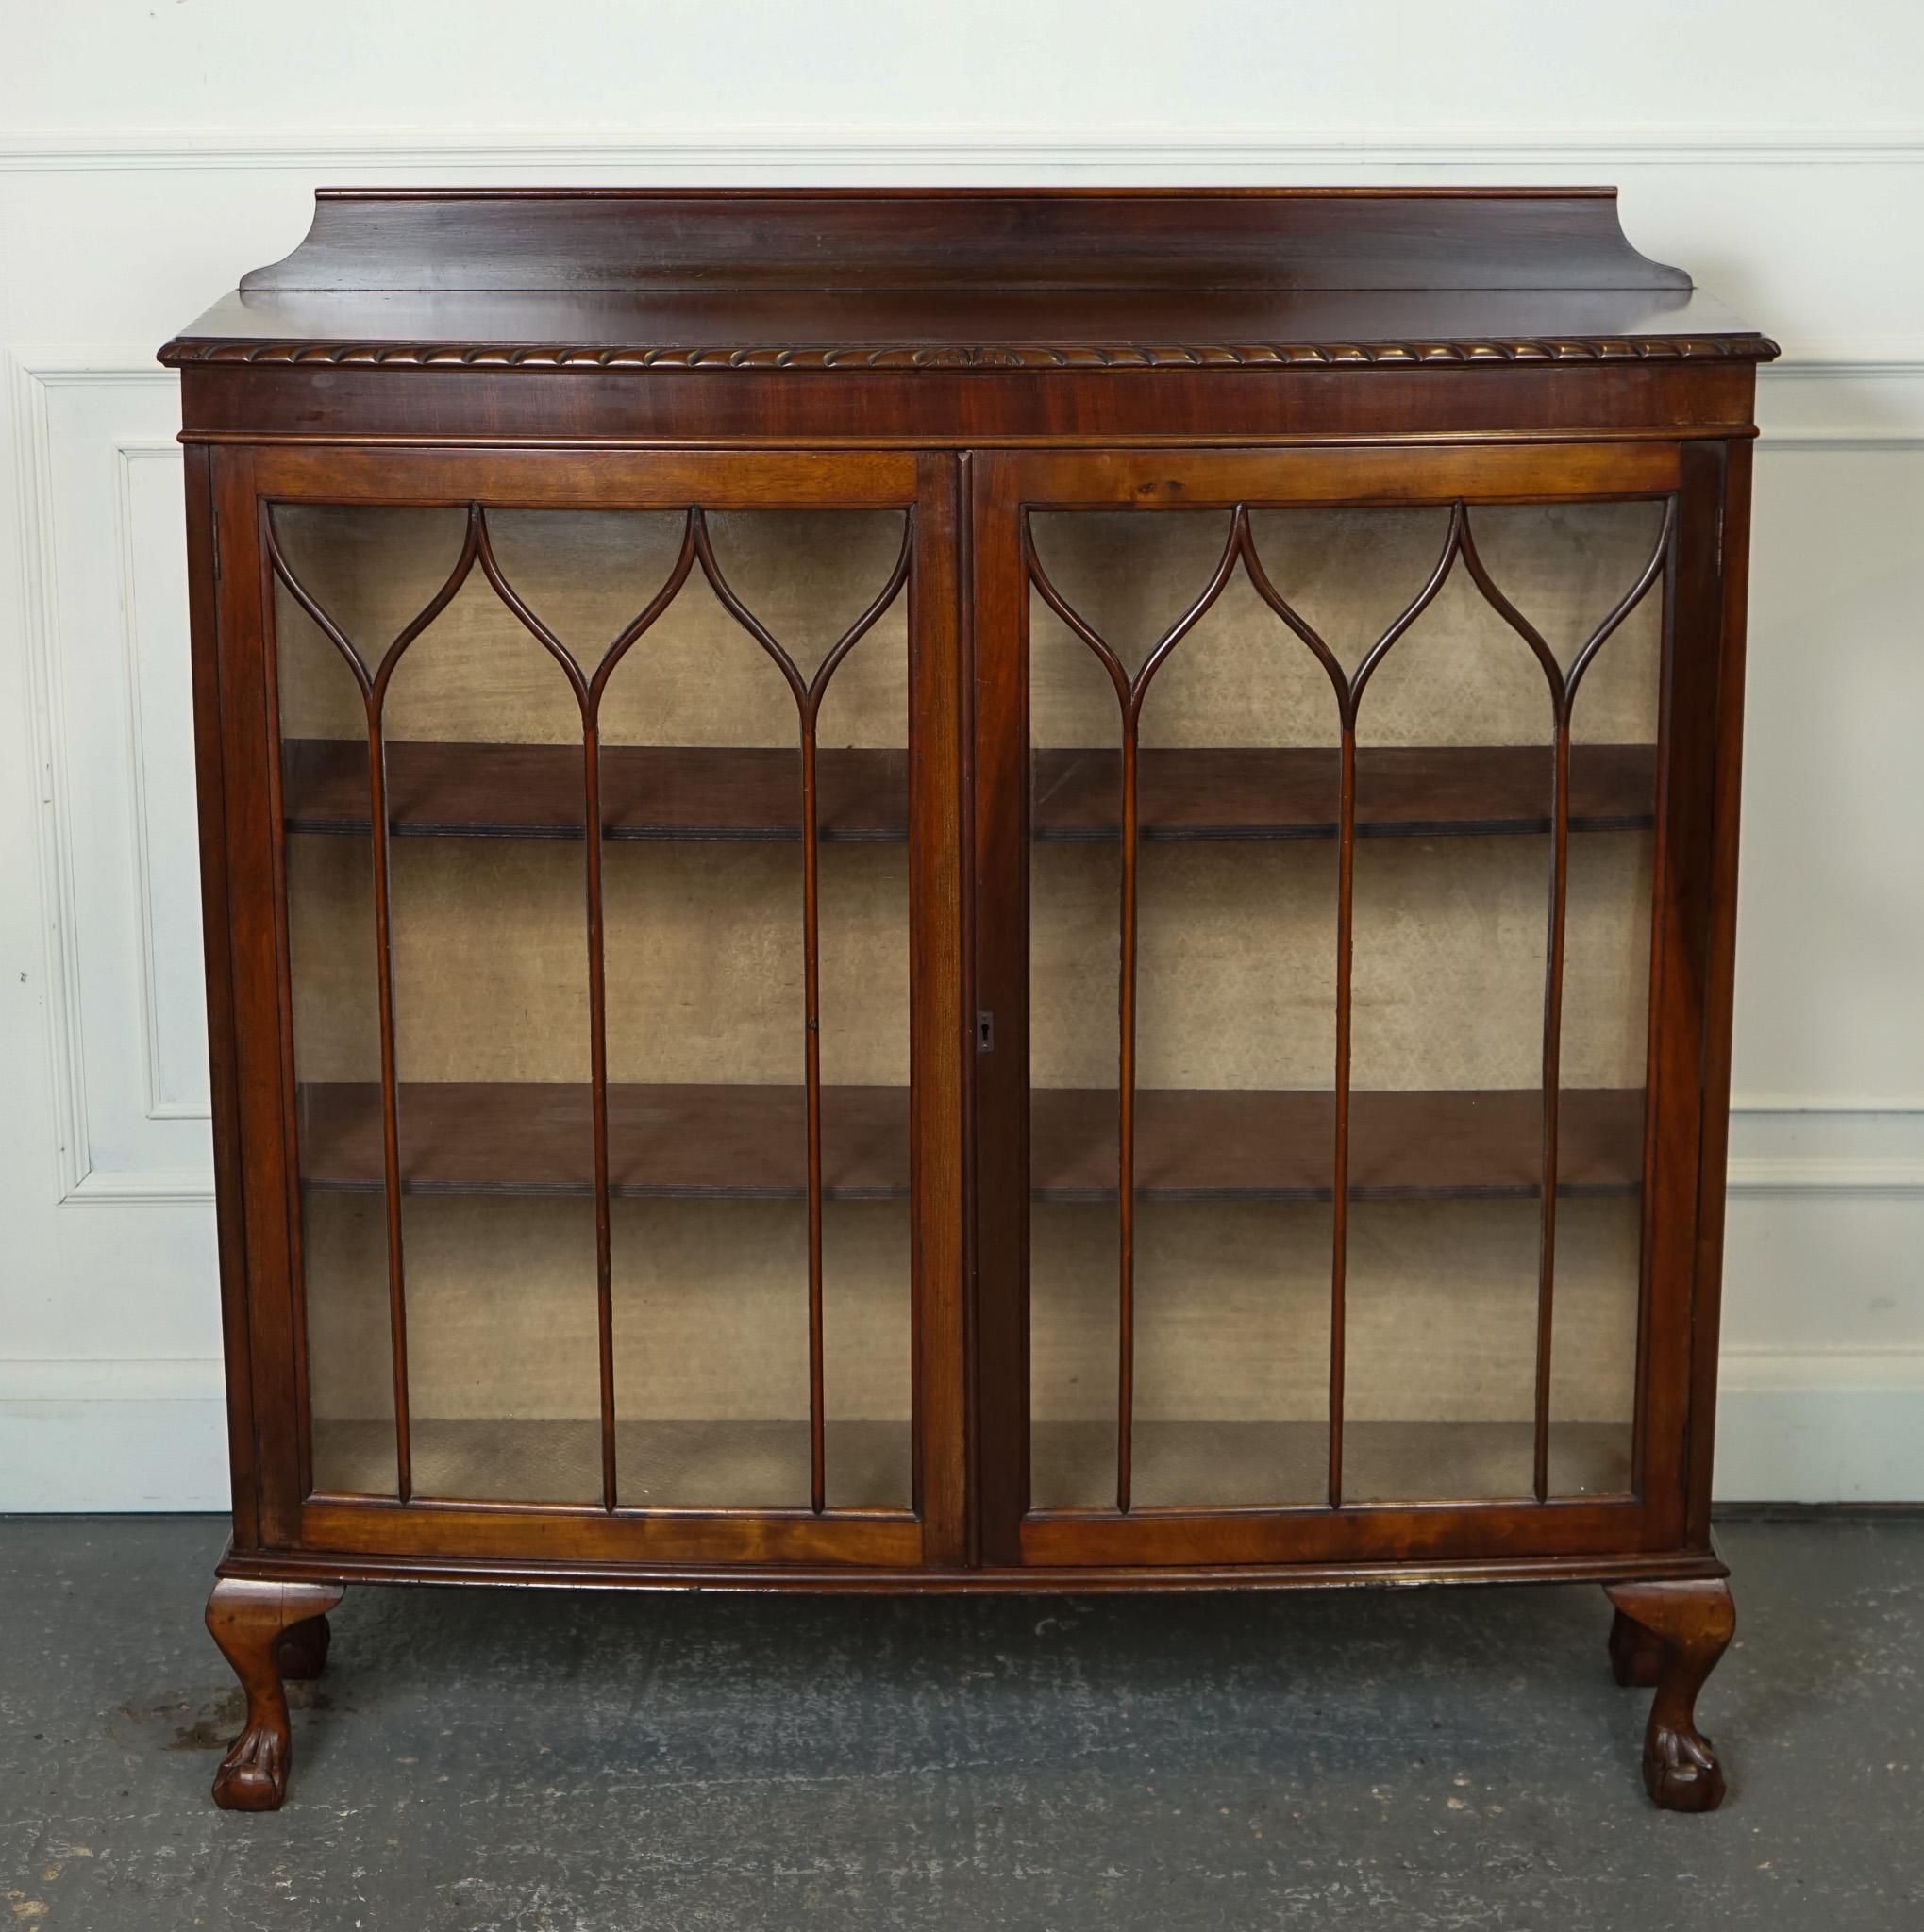 
We are delighted to offer for sale this Antique 1920s English China Cabinet Bookcase.

The English antique 1920s China display cabinet bookcase is a stunning piece of furniture that exudes elegance and charm. This cabinet features a classic design